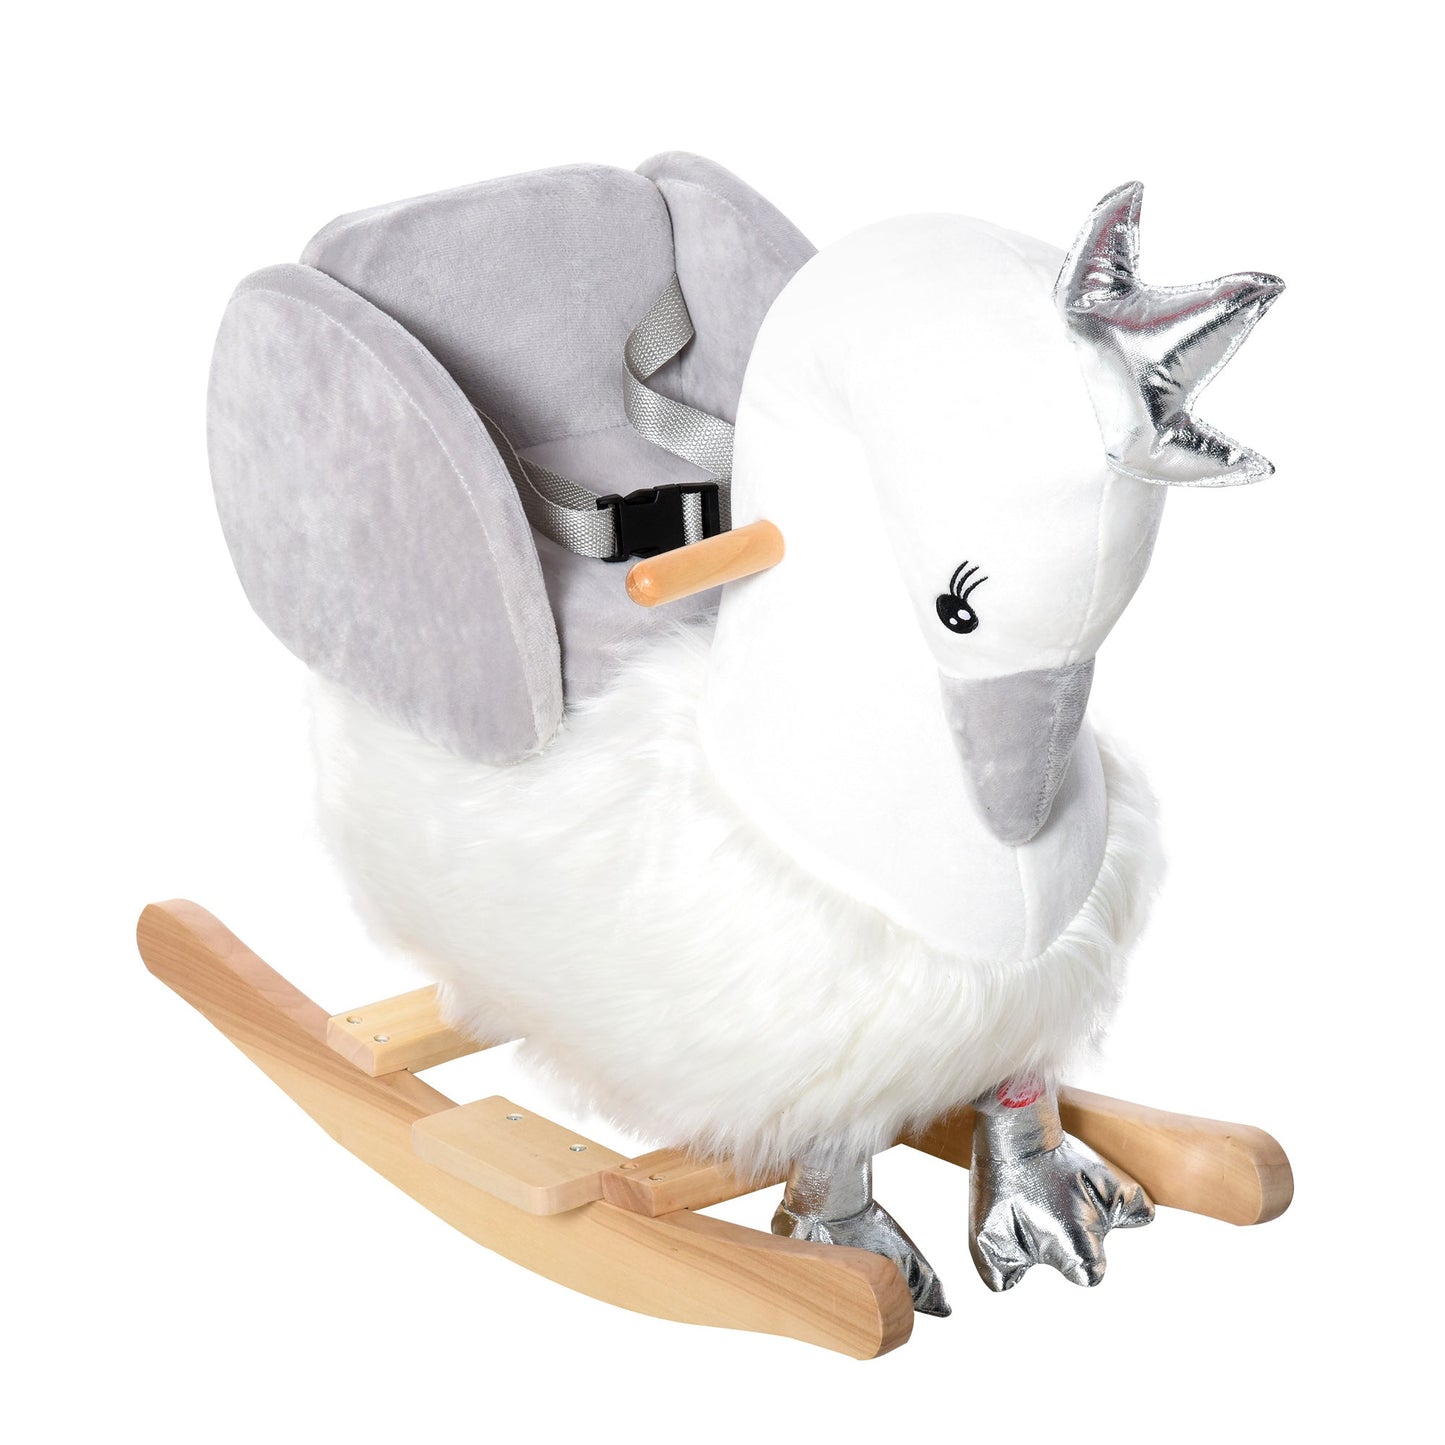 Kids Wooden Rocking Horse Swan Baby Rocking Chair Plush Ride On Swan with Sounds, Wooden Base for Babies 18-36 Months, White and Grey at Gallery Canada